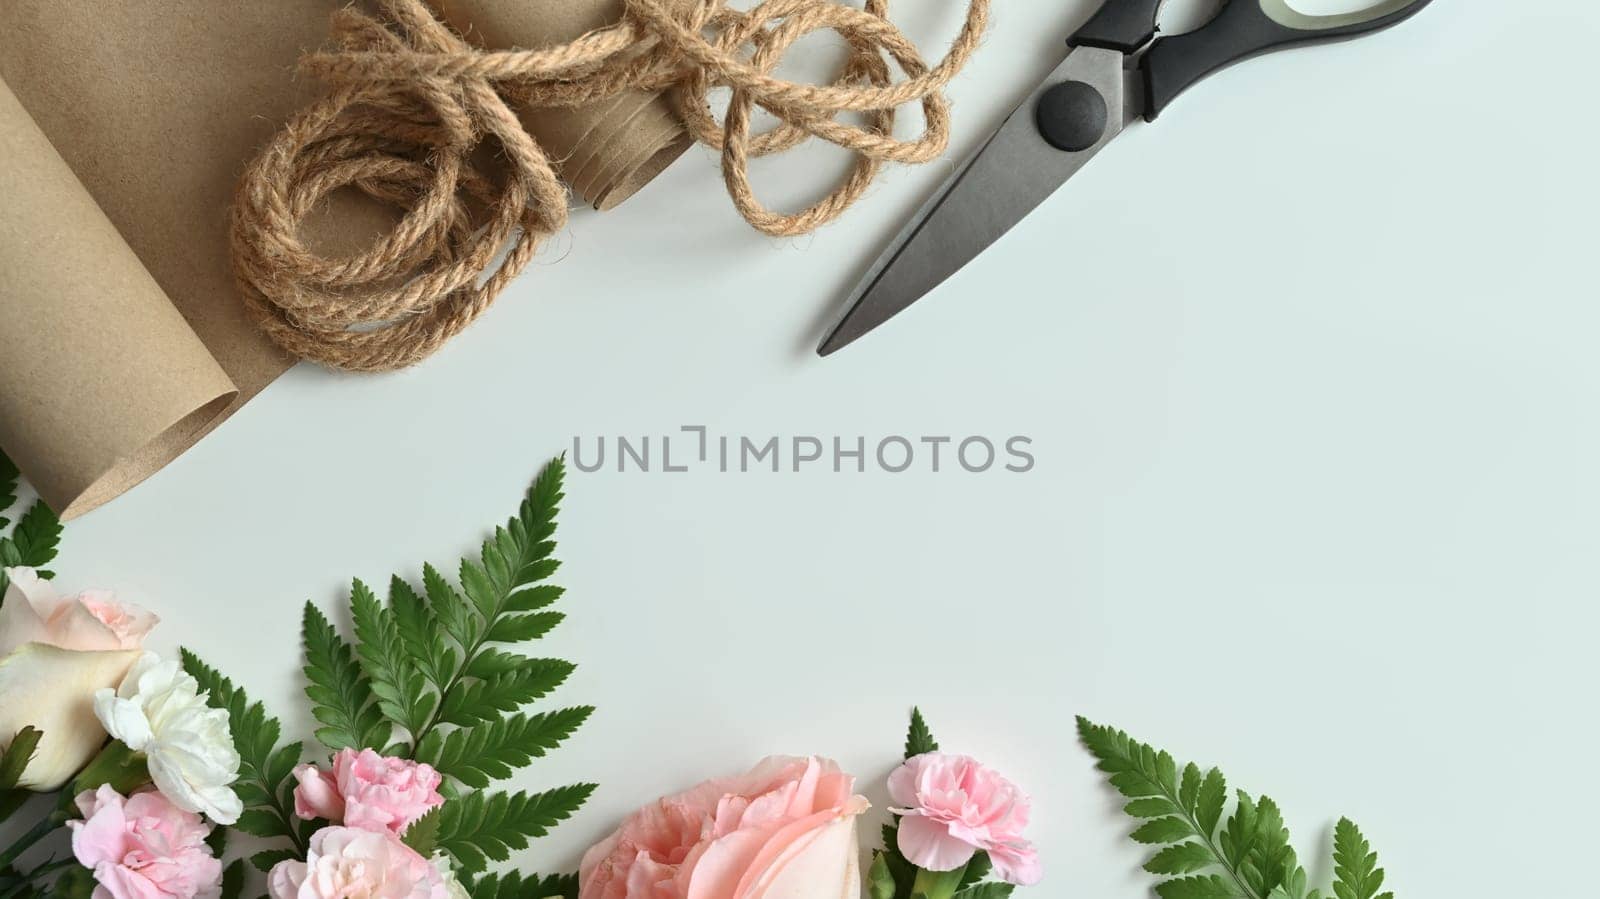 Florist equipment with fresh flowers on white background. Flat lay, top view with copy space by prathanchorruangsak